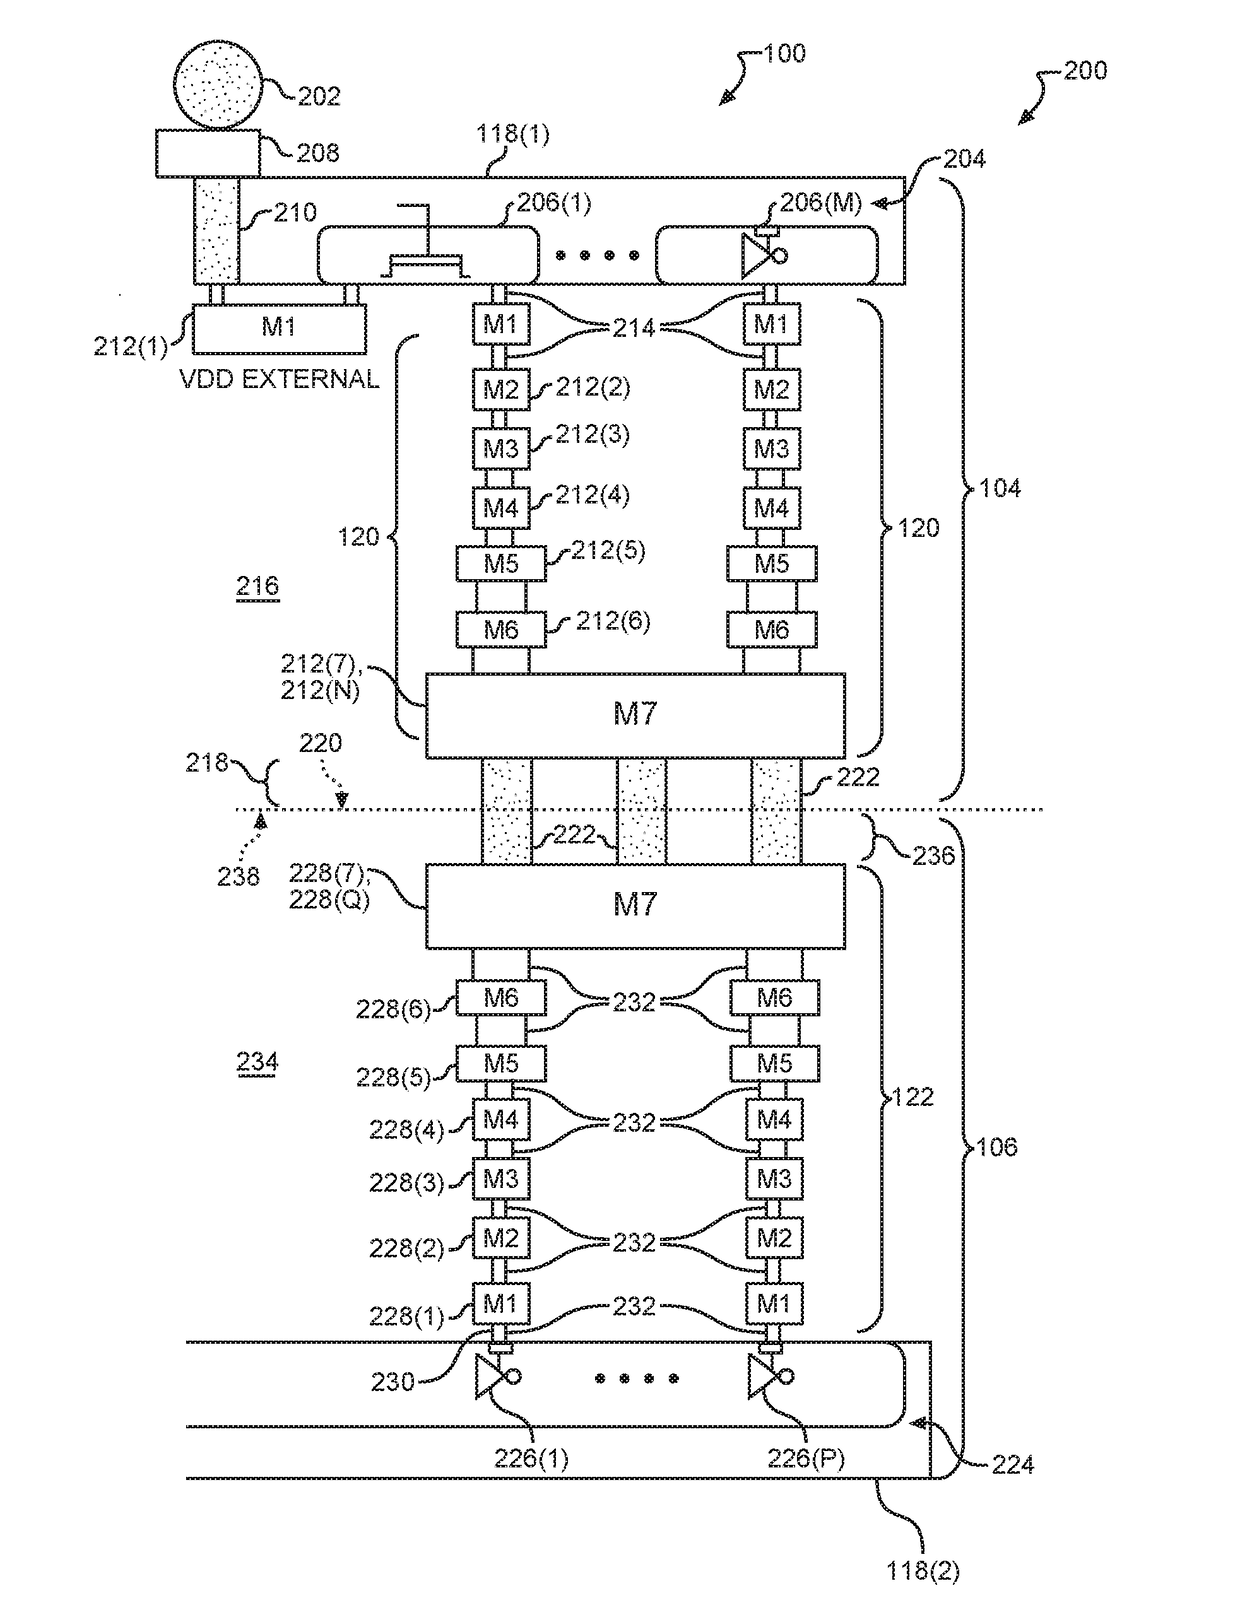 Power distribution networks for a three-dimensional (3D) integrated circuit (IC) (3DIC)